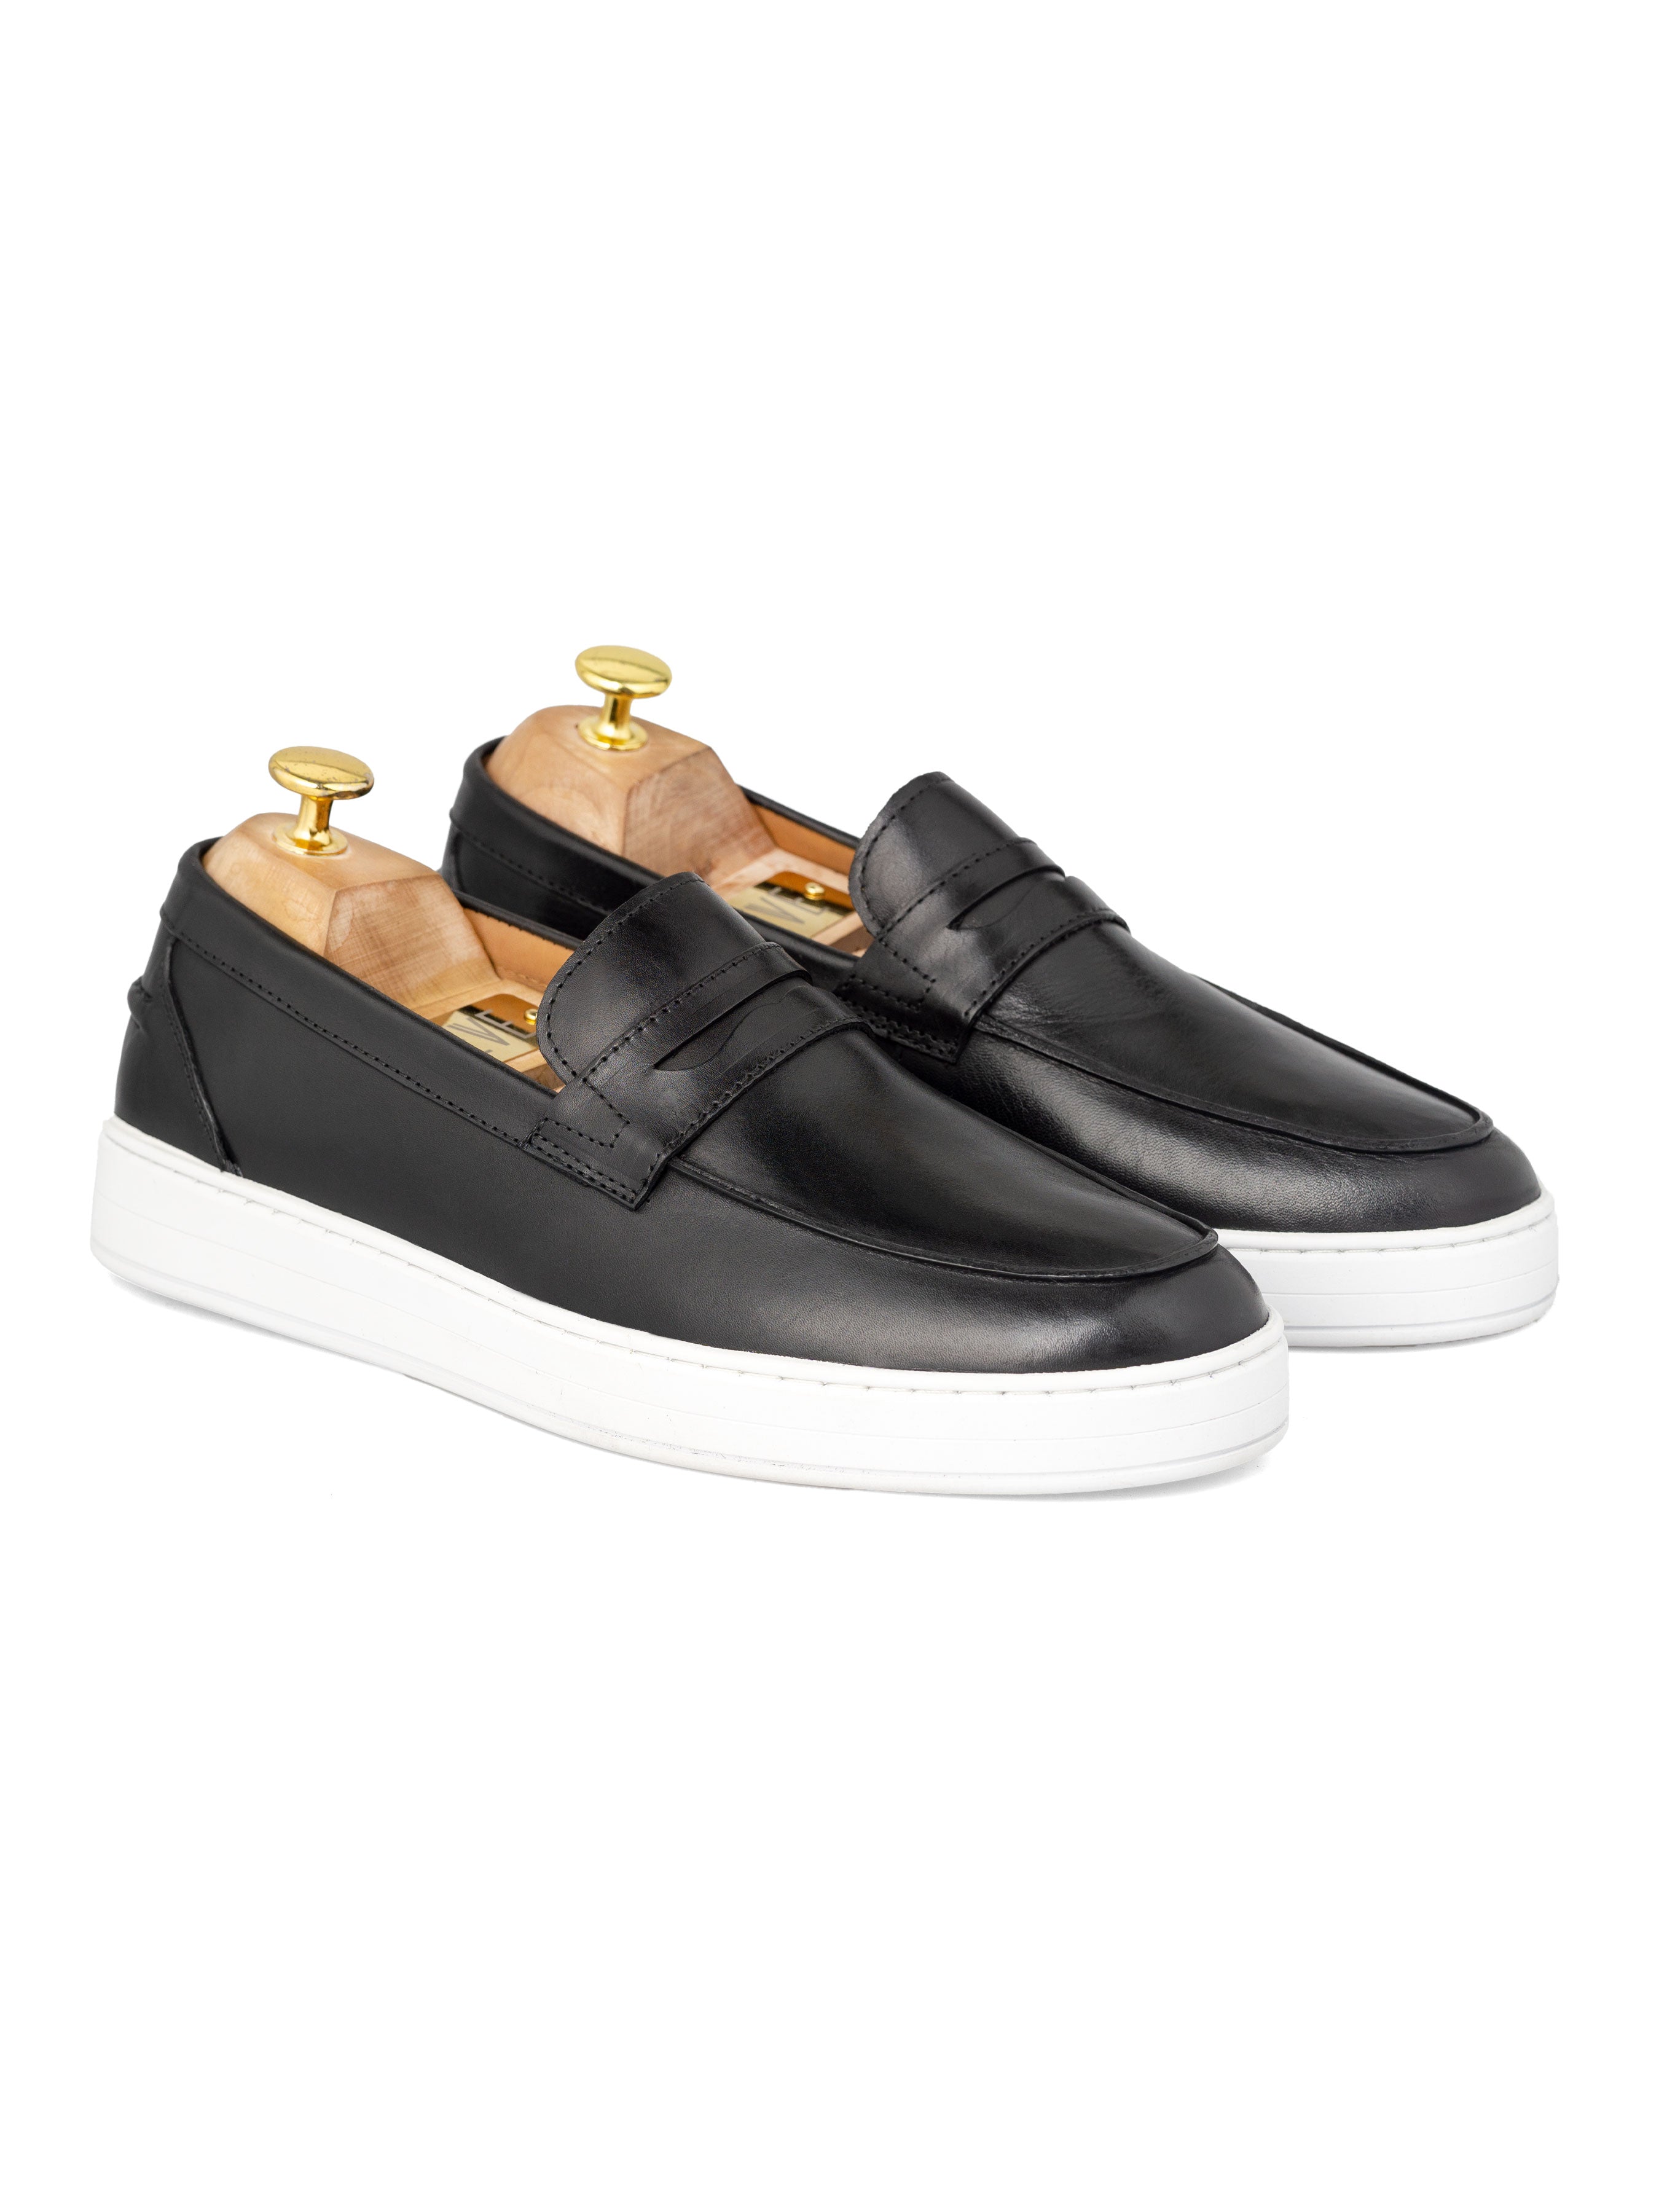 Penny Sneakers - Black Leather - Zeve Shoes